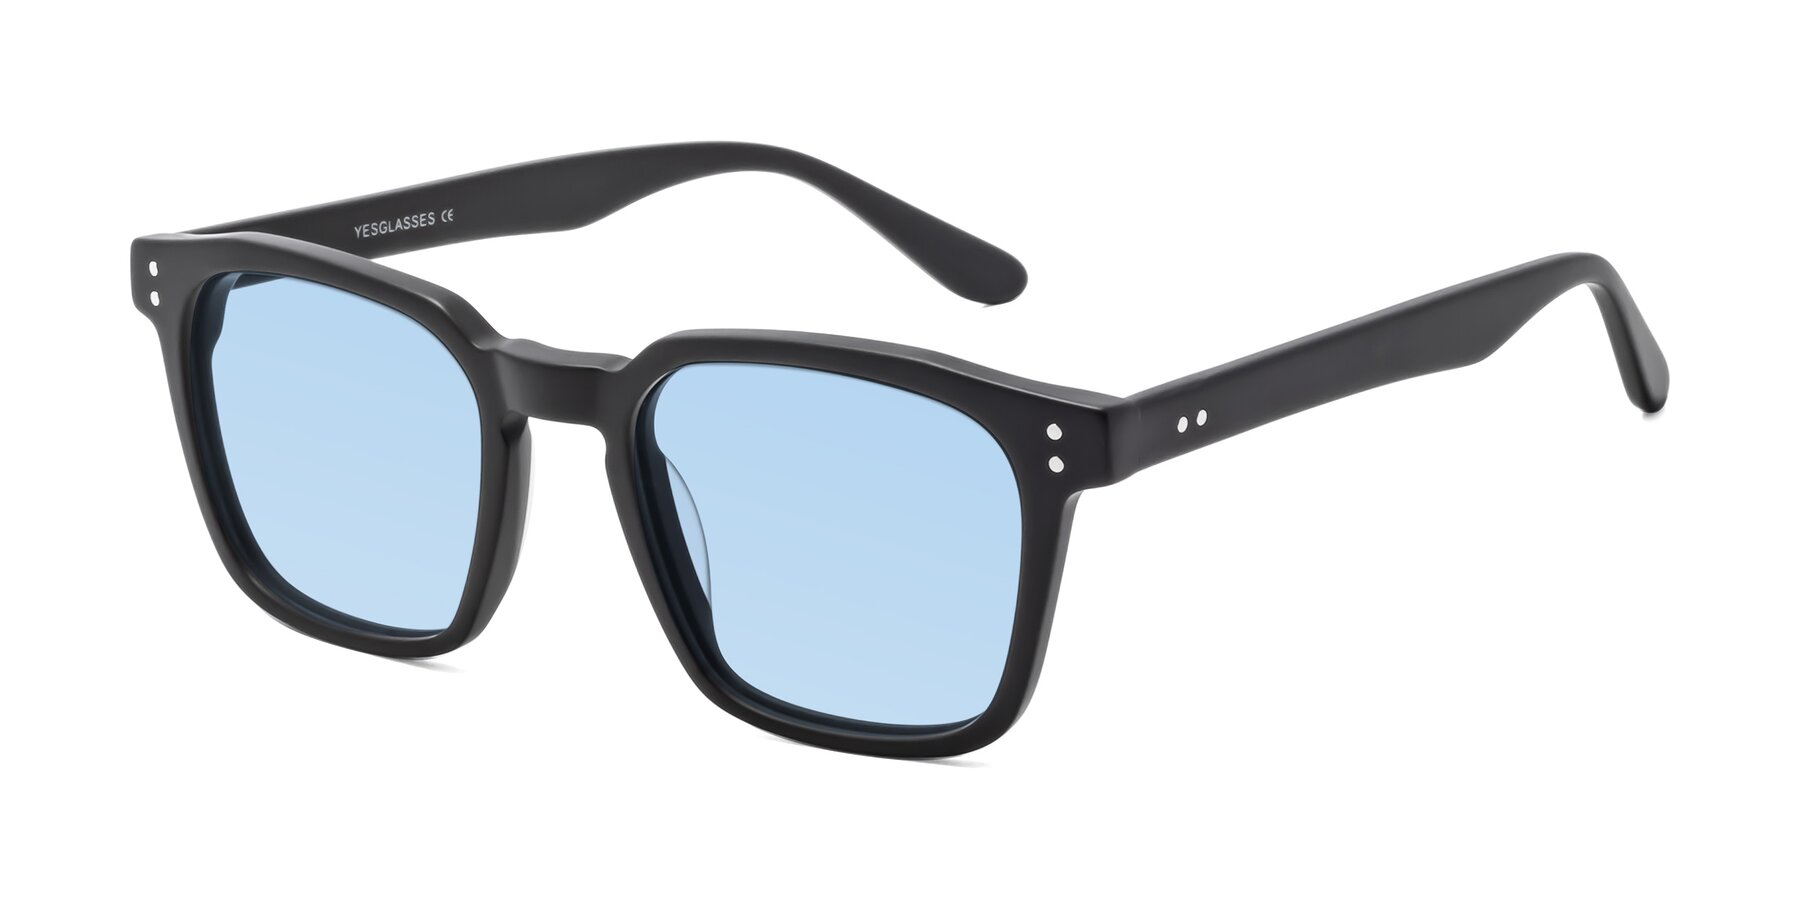 Angle of Riverside in Matte Black with Light Blue Tinted Lenses